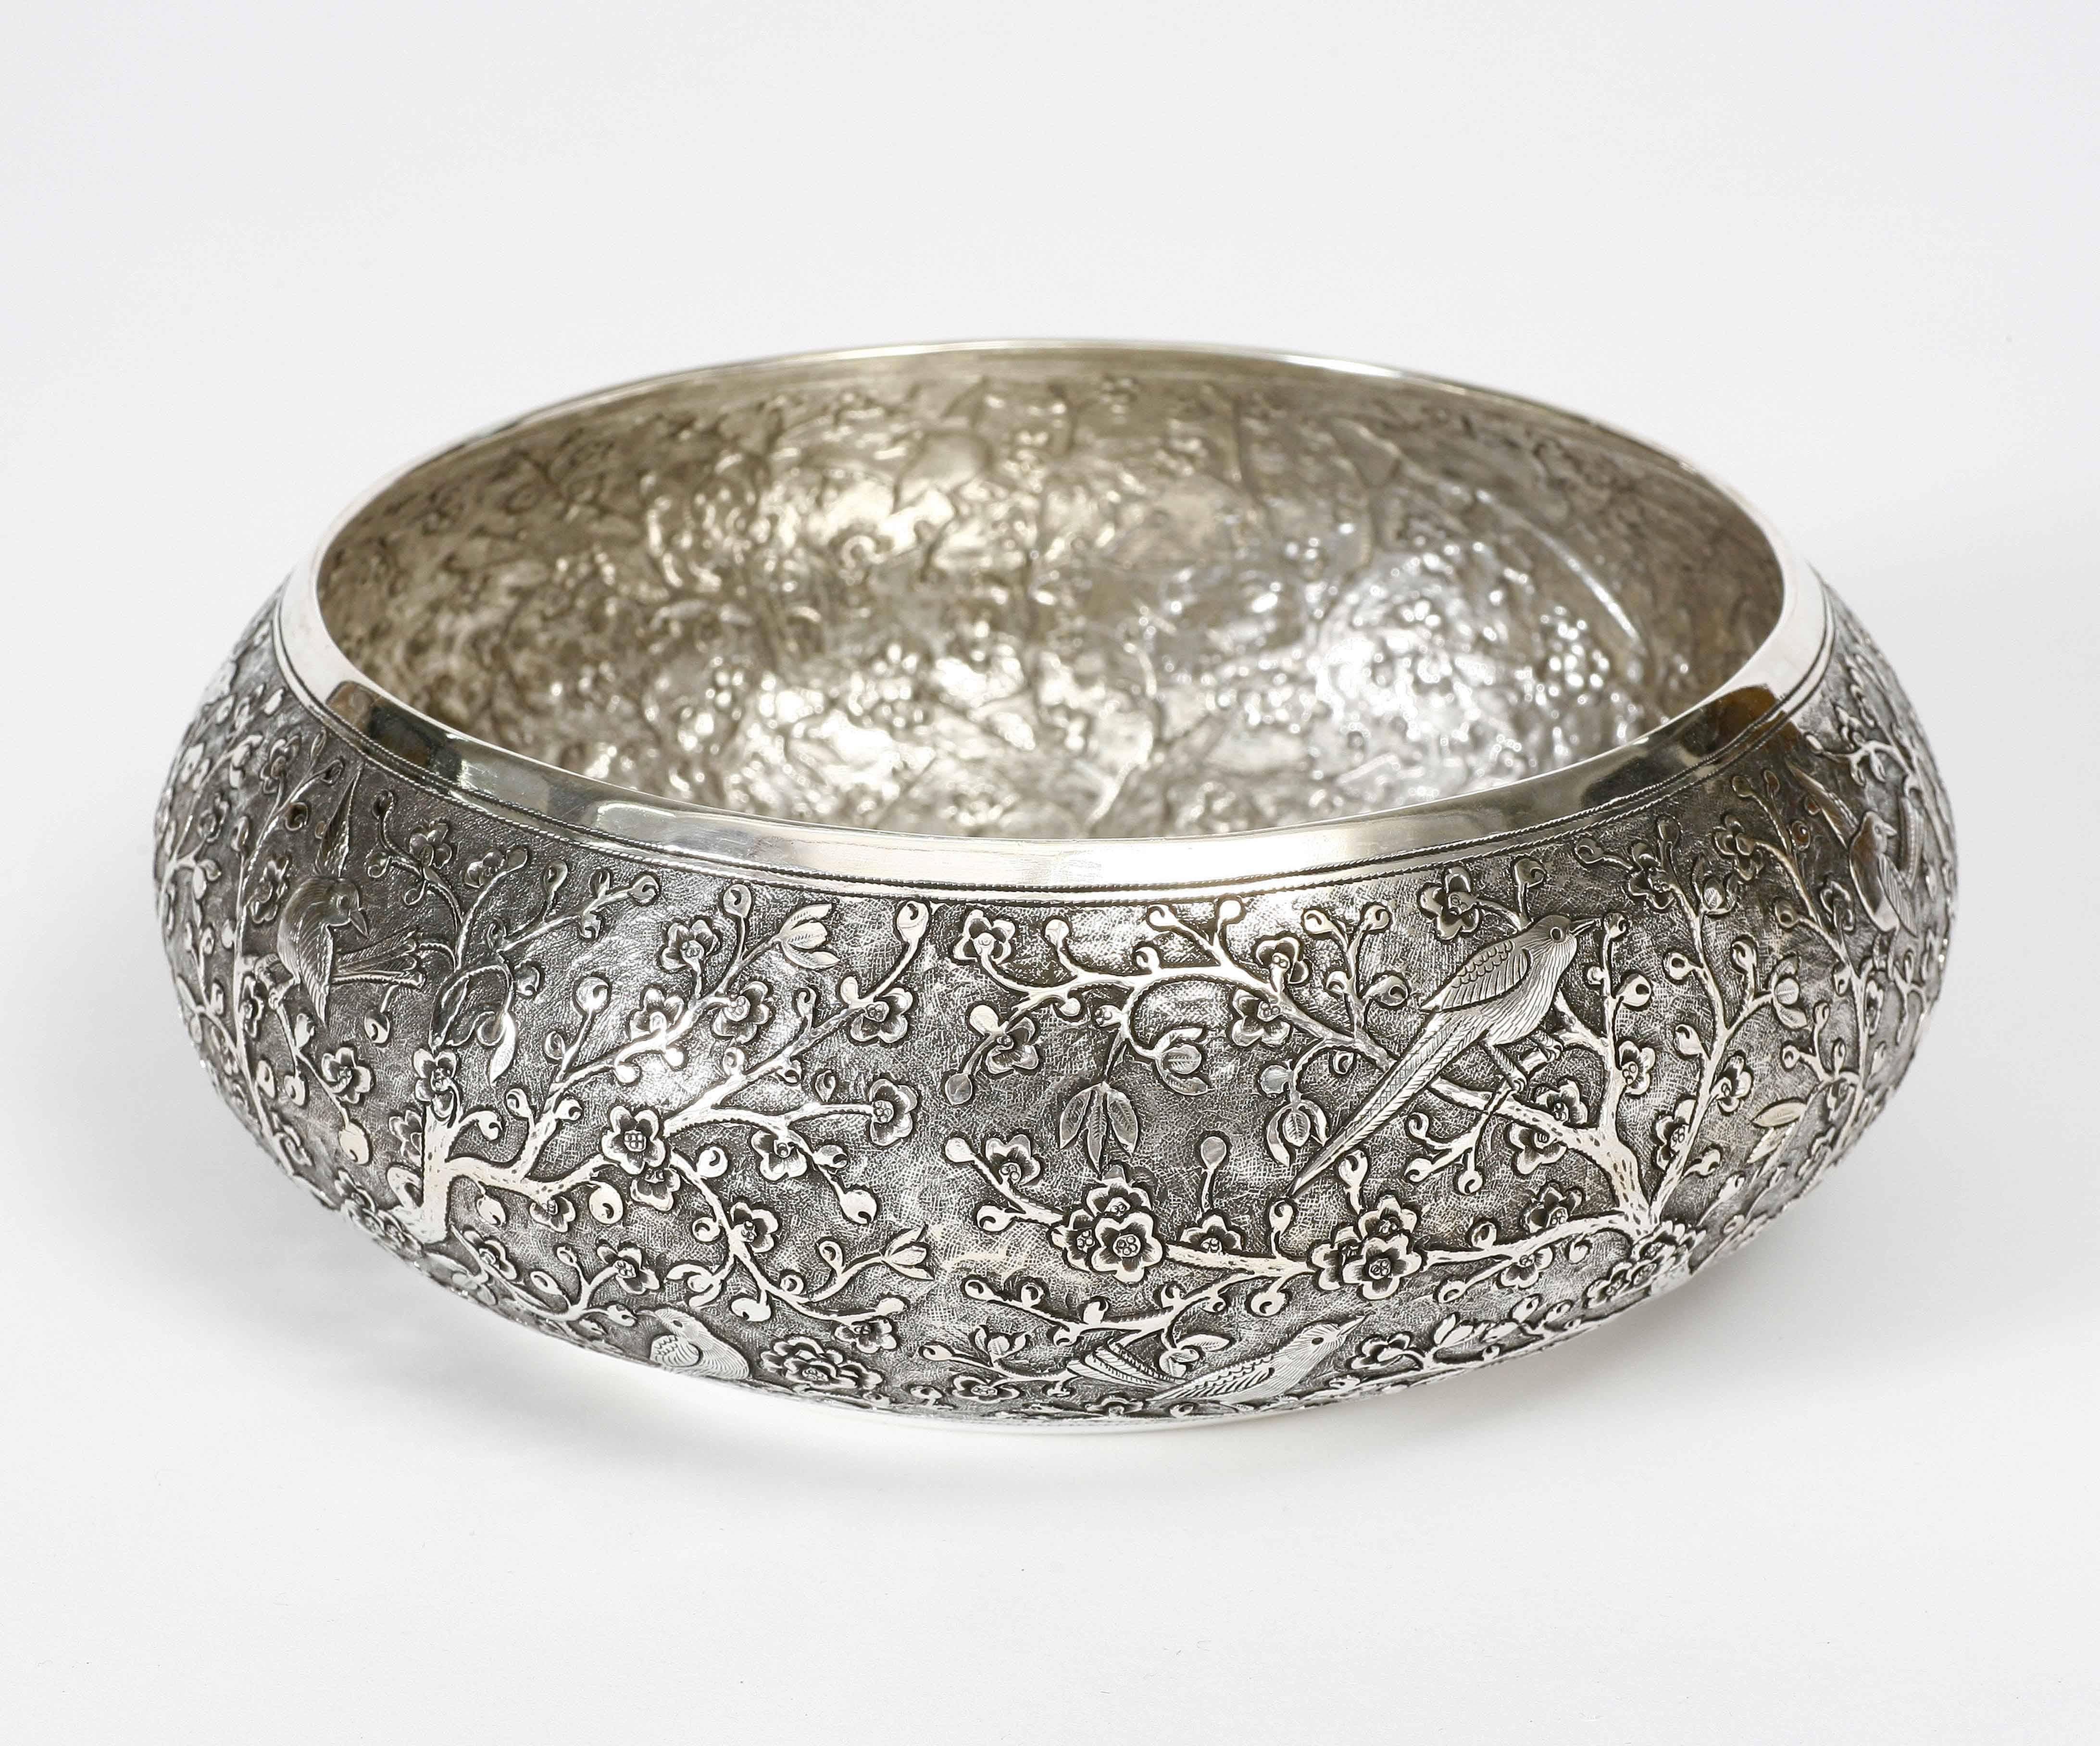 The fine solid silver bowl is chased with meticulous motif of blossom and birds. The bowl is available in other sizes.
The silver is 90% pure.